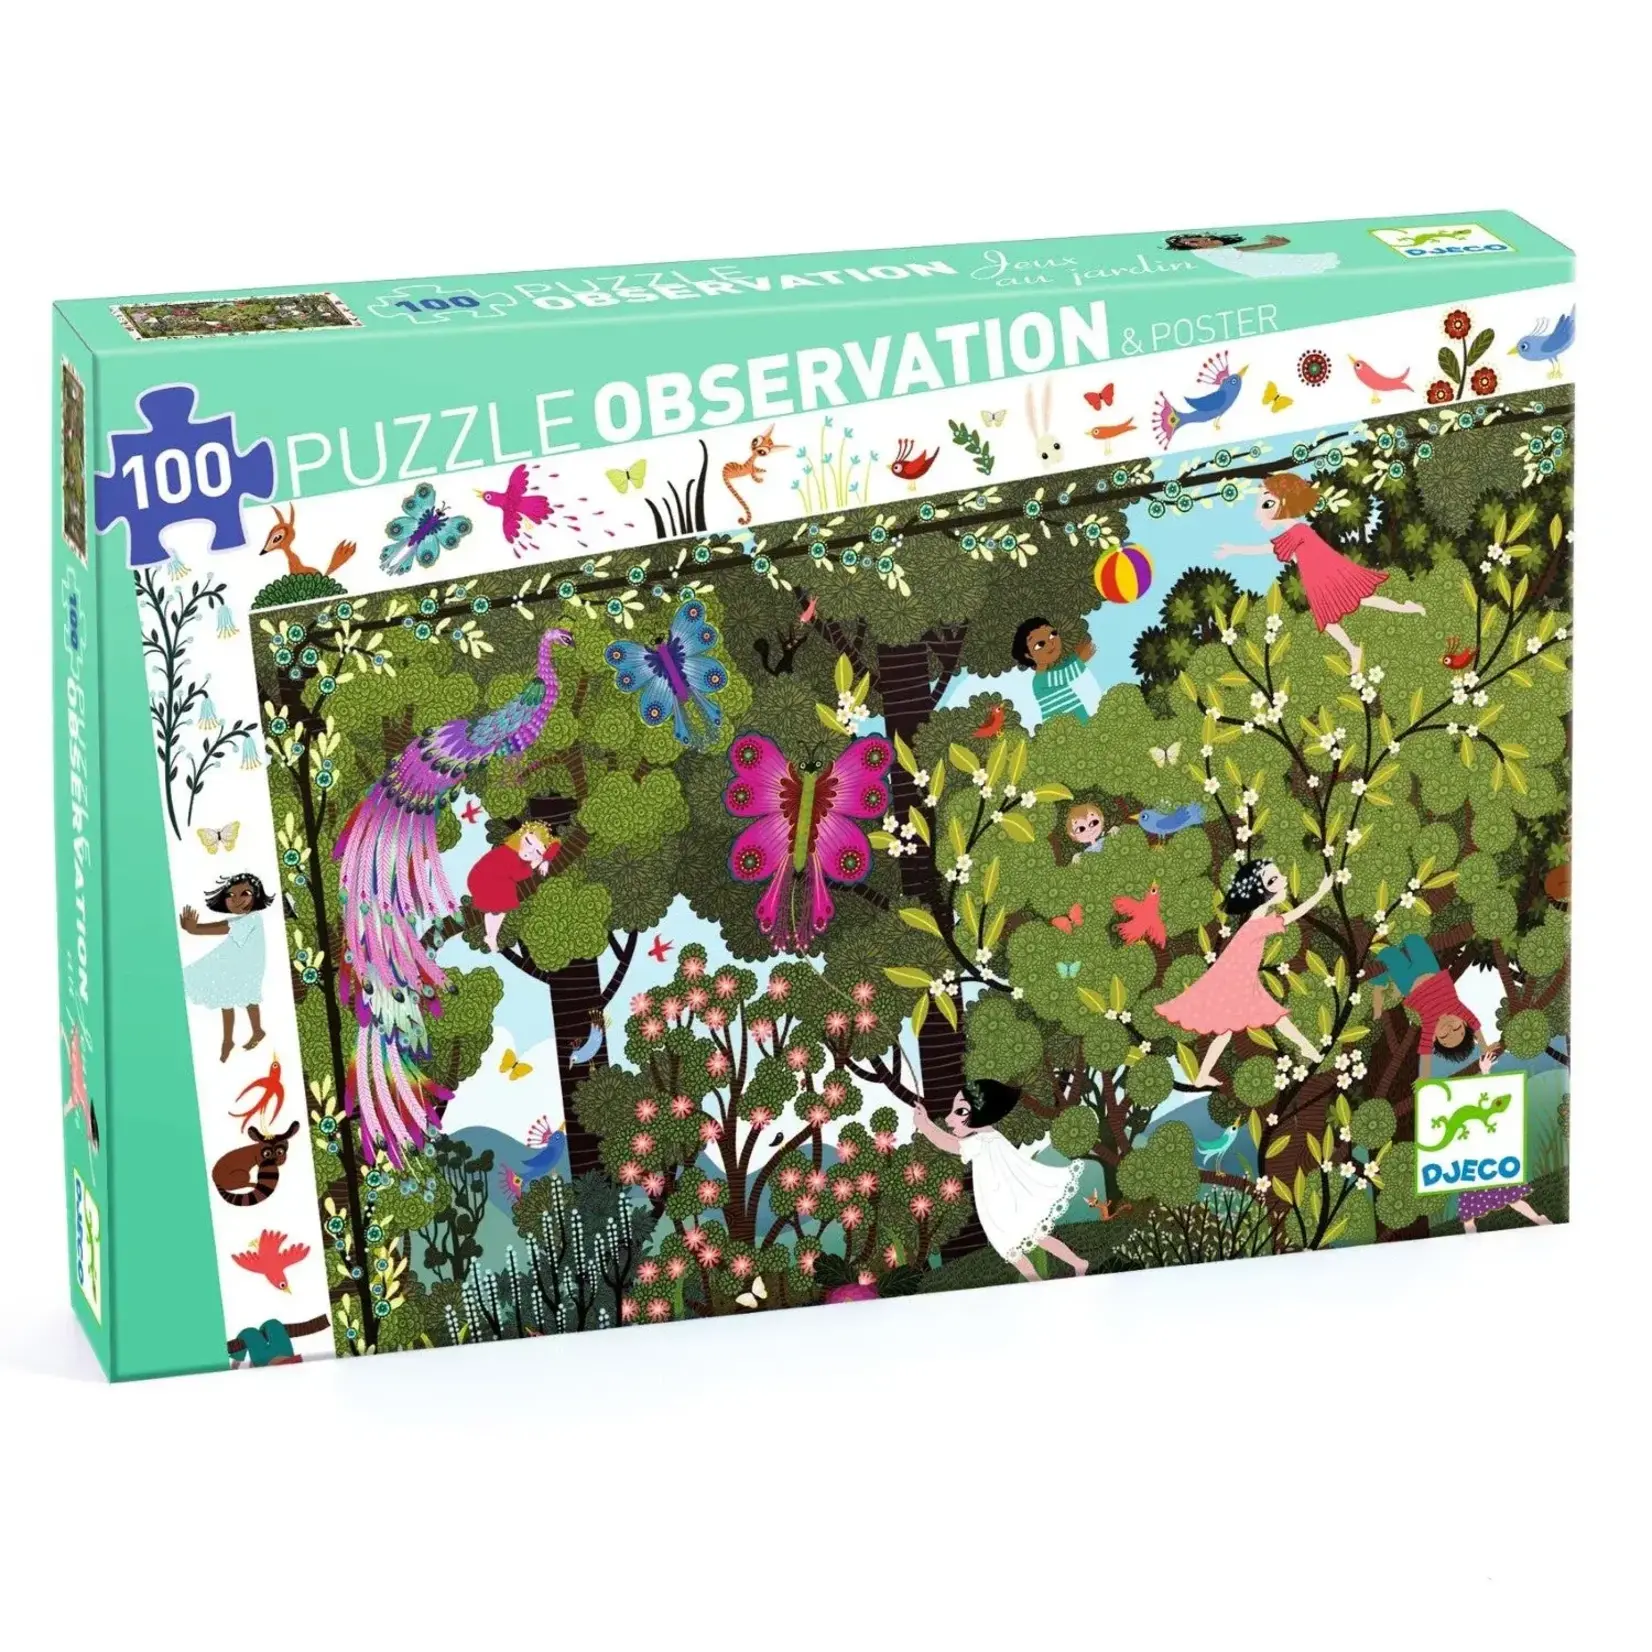 Djeco Observation Garden Play Time Puzzle 100pc